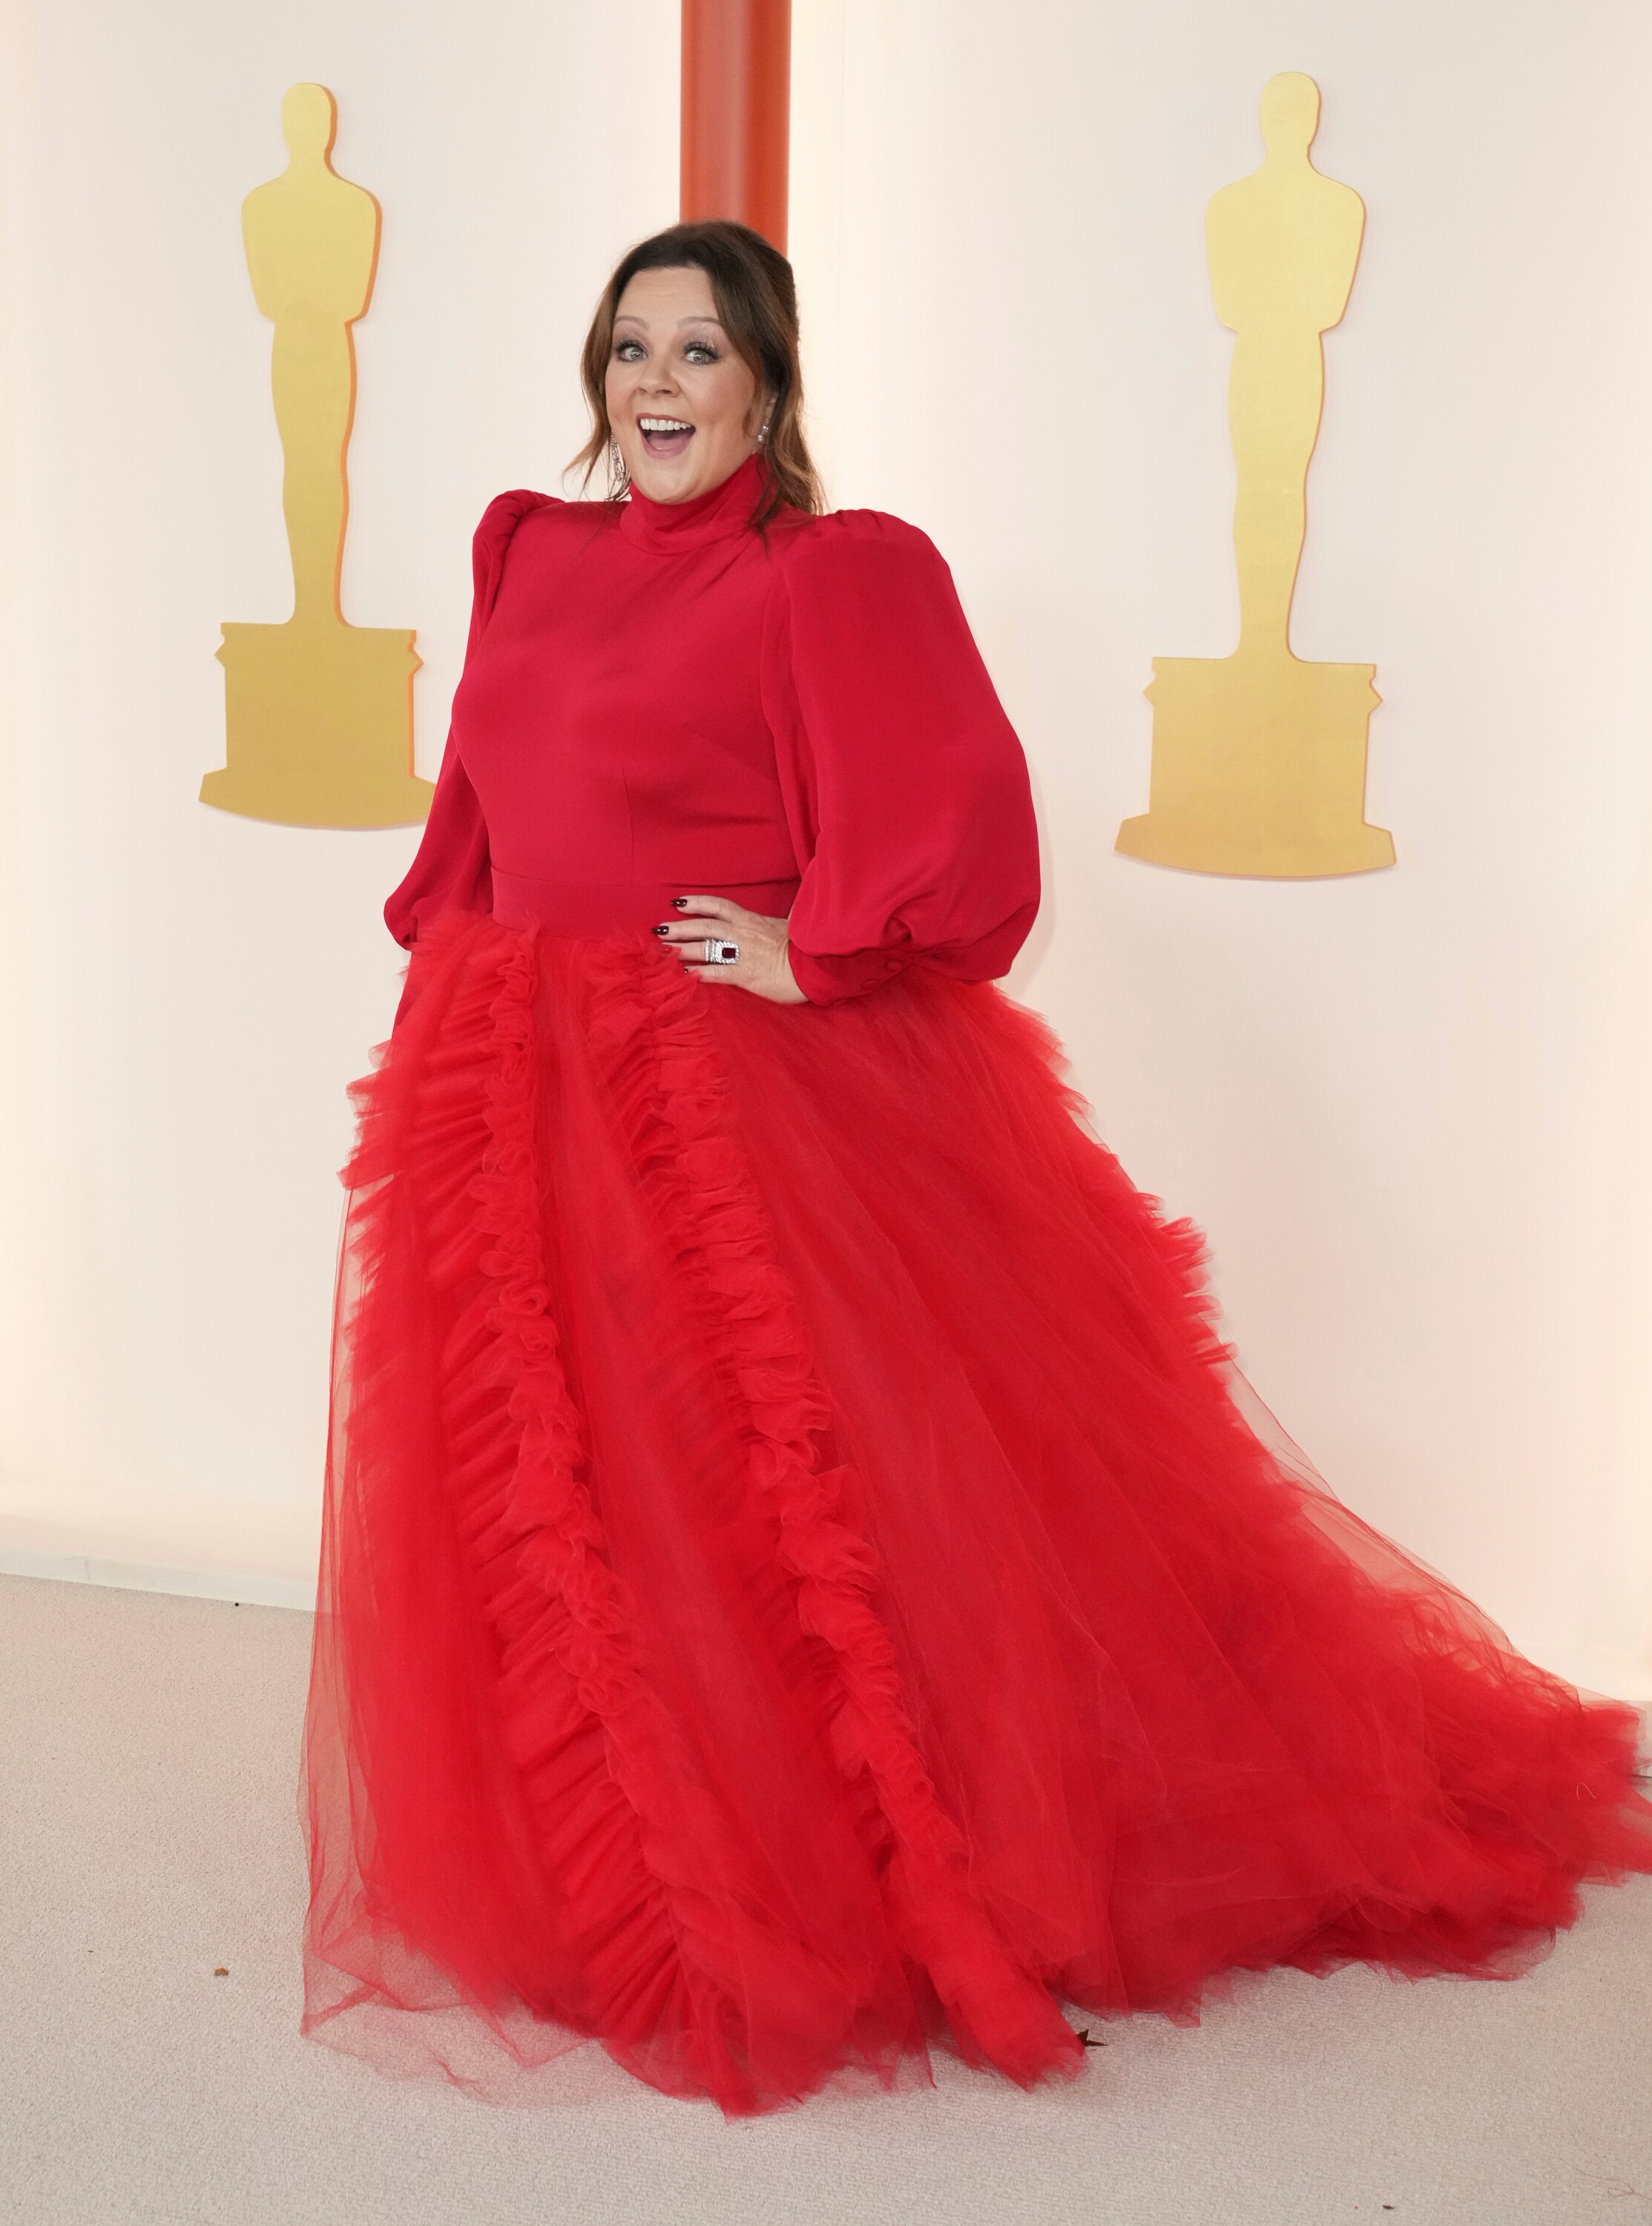 Melissa McCarthy wearing a long-sleeved, full-length red gown with a tulle ruffled skirt.